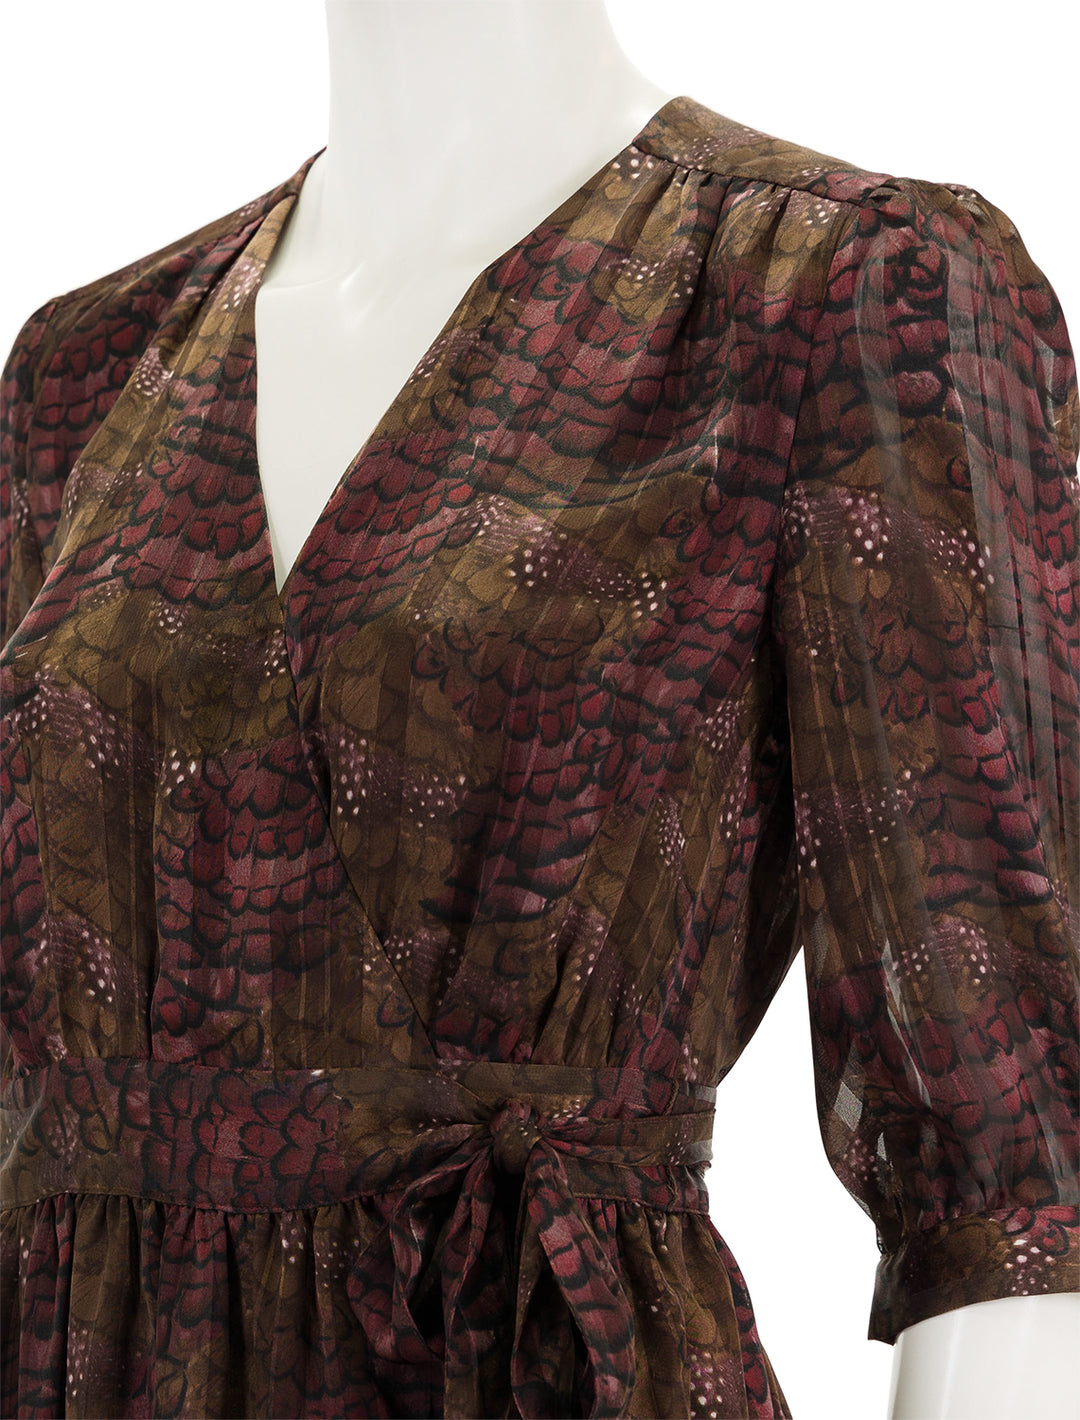 Close-up view of Scotch & Soda's asymmetric wrap dress in feather bordeaux.